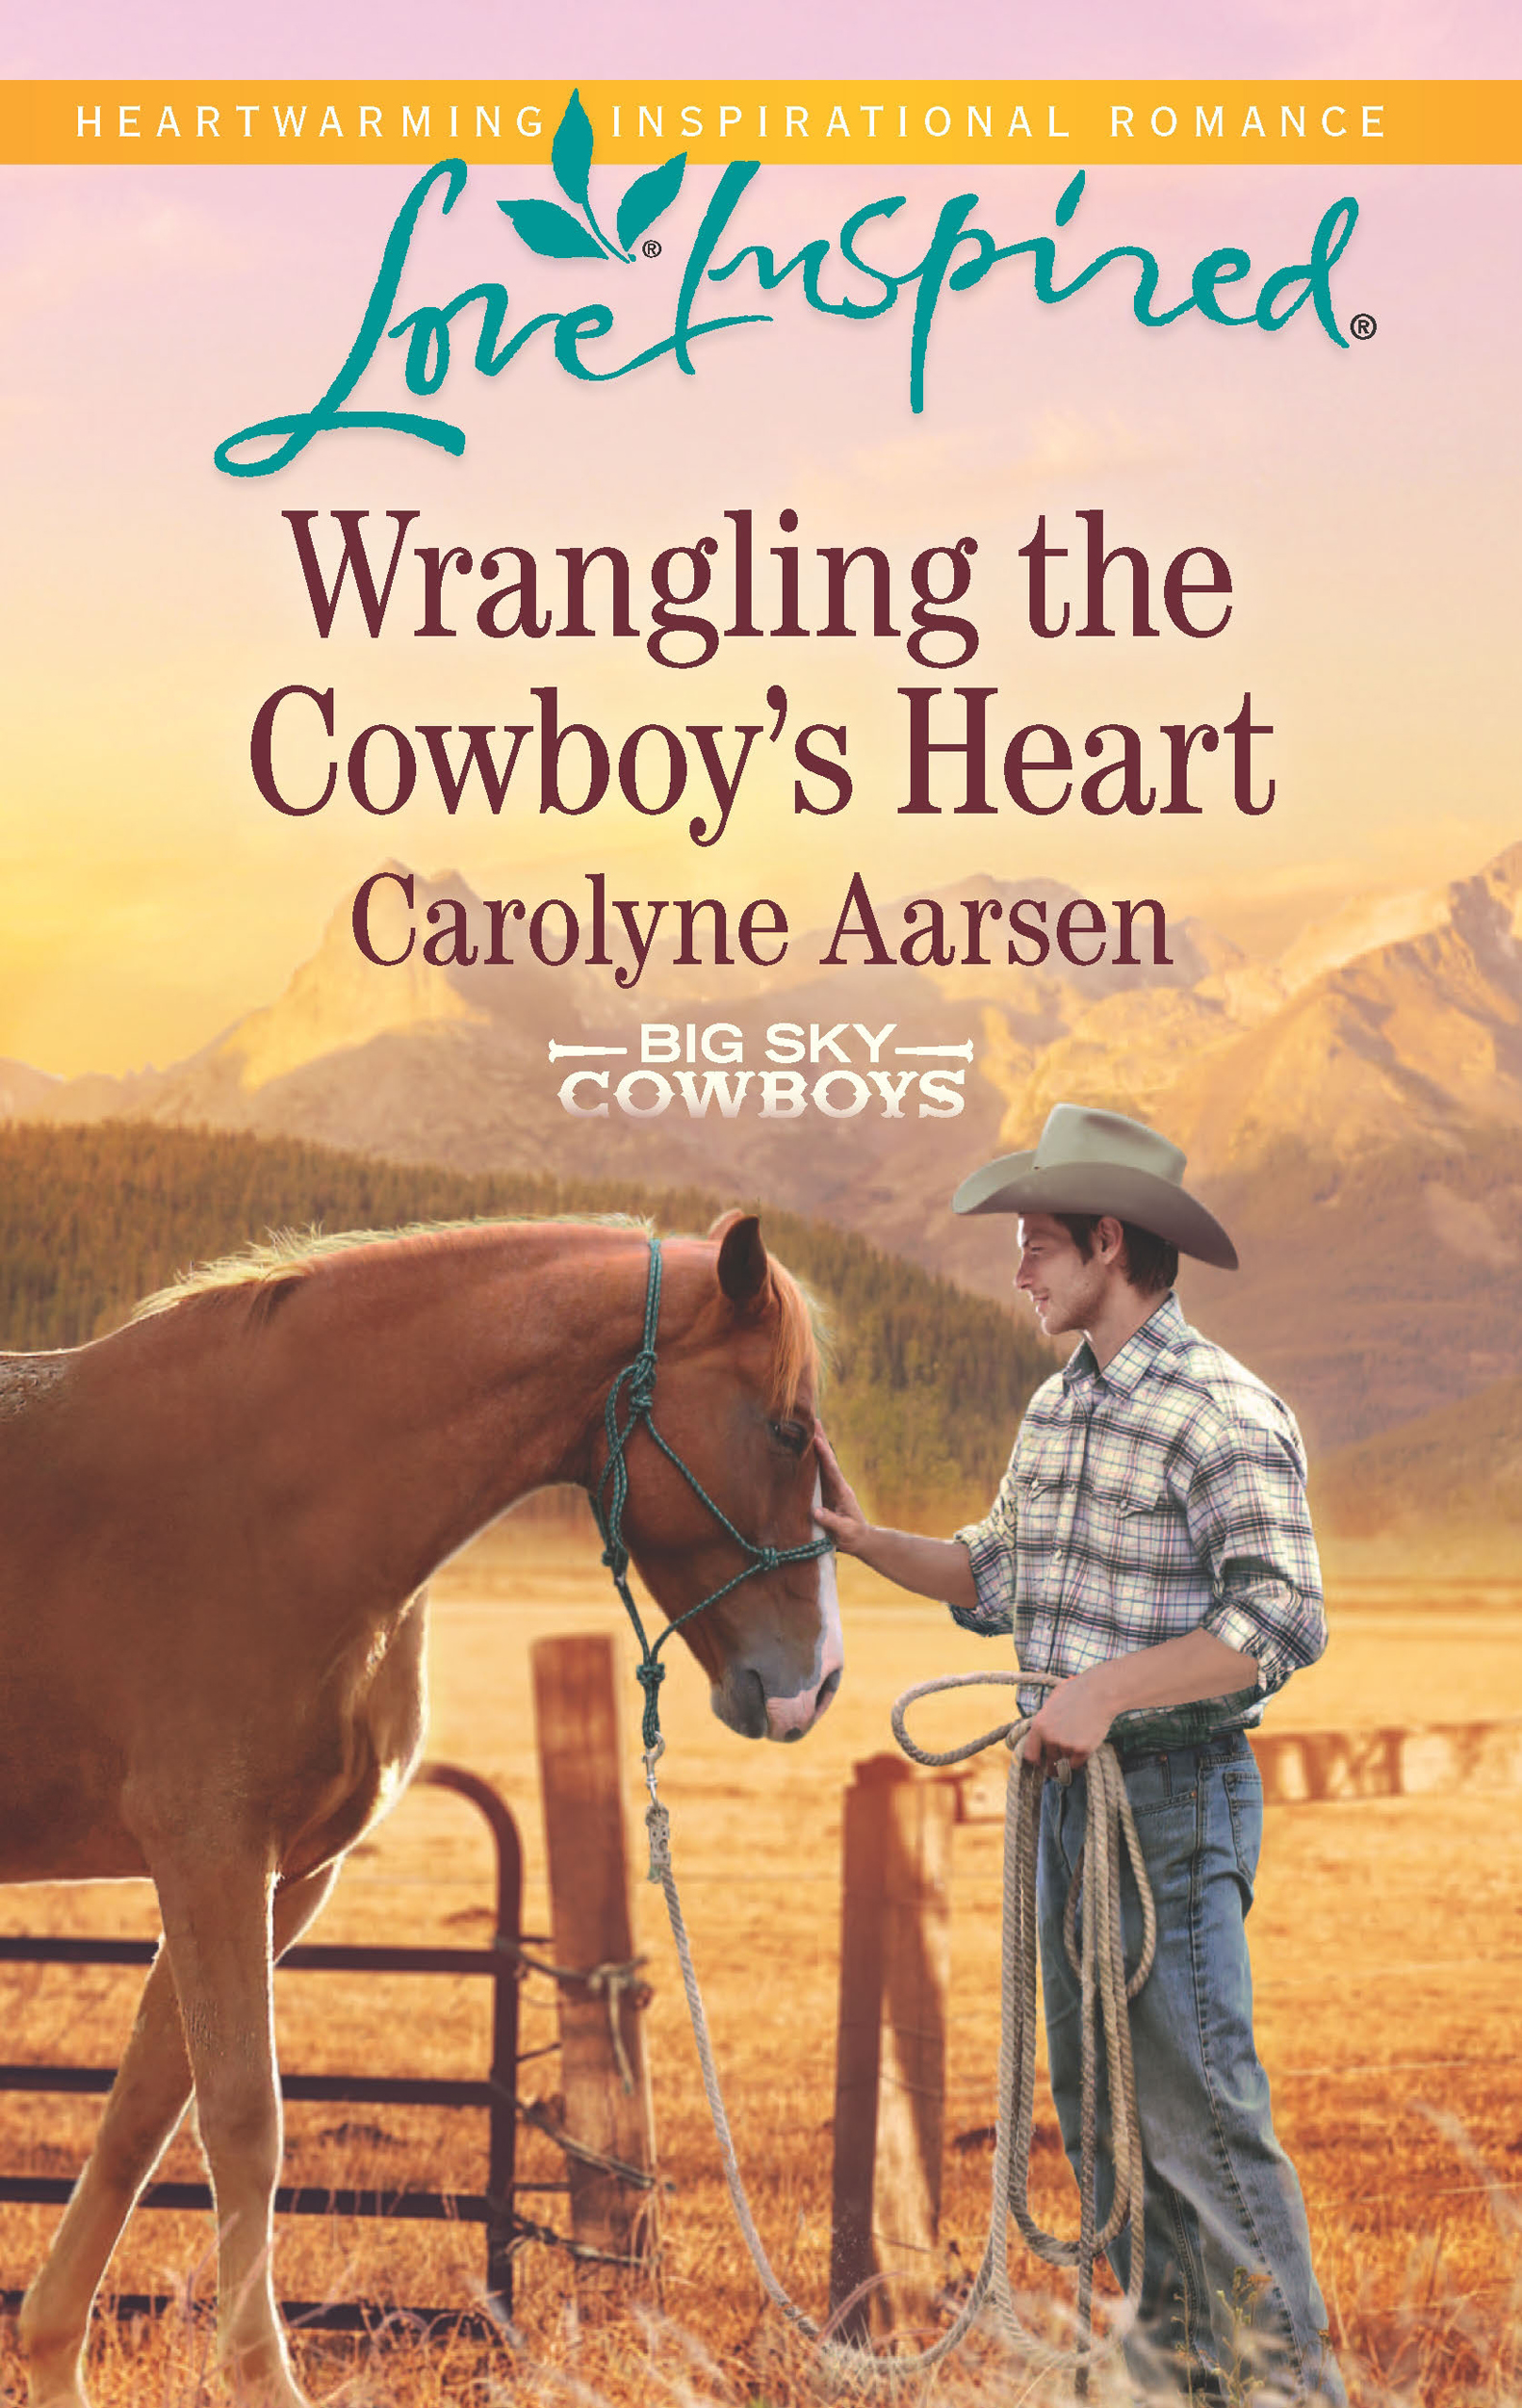 Wrangling the Cowboy's Heart (2015)